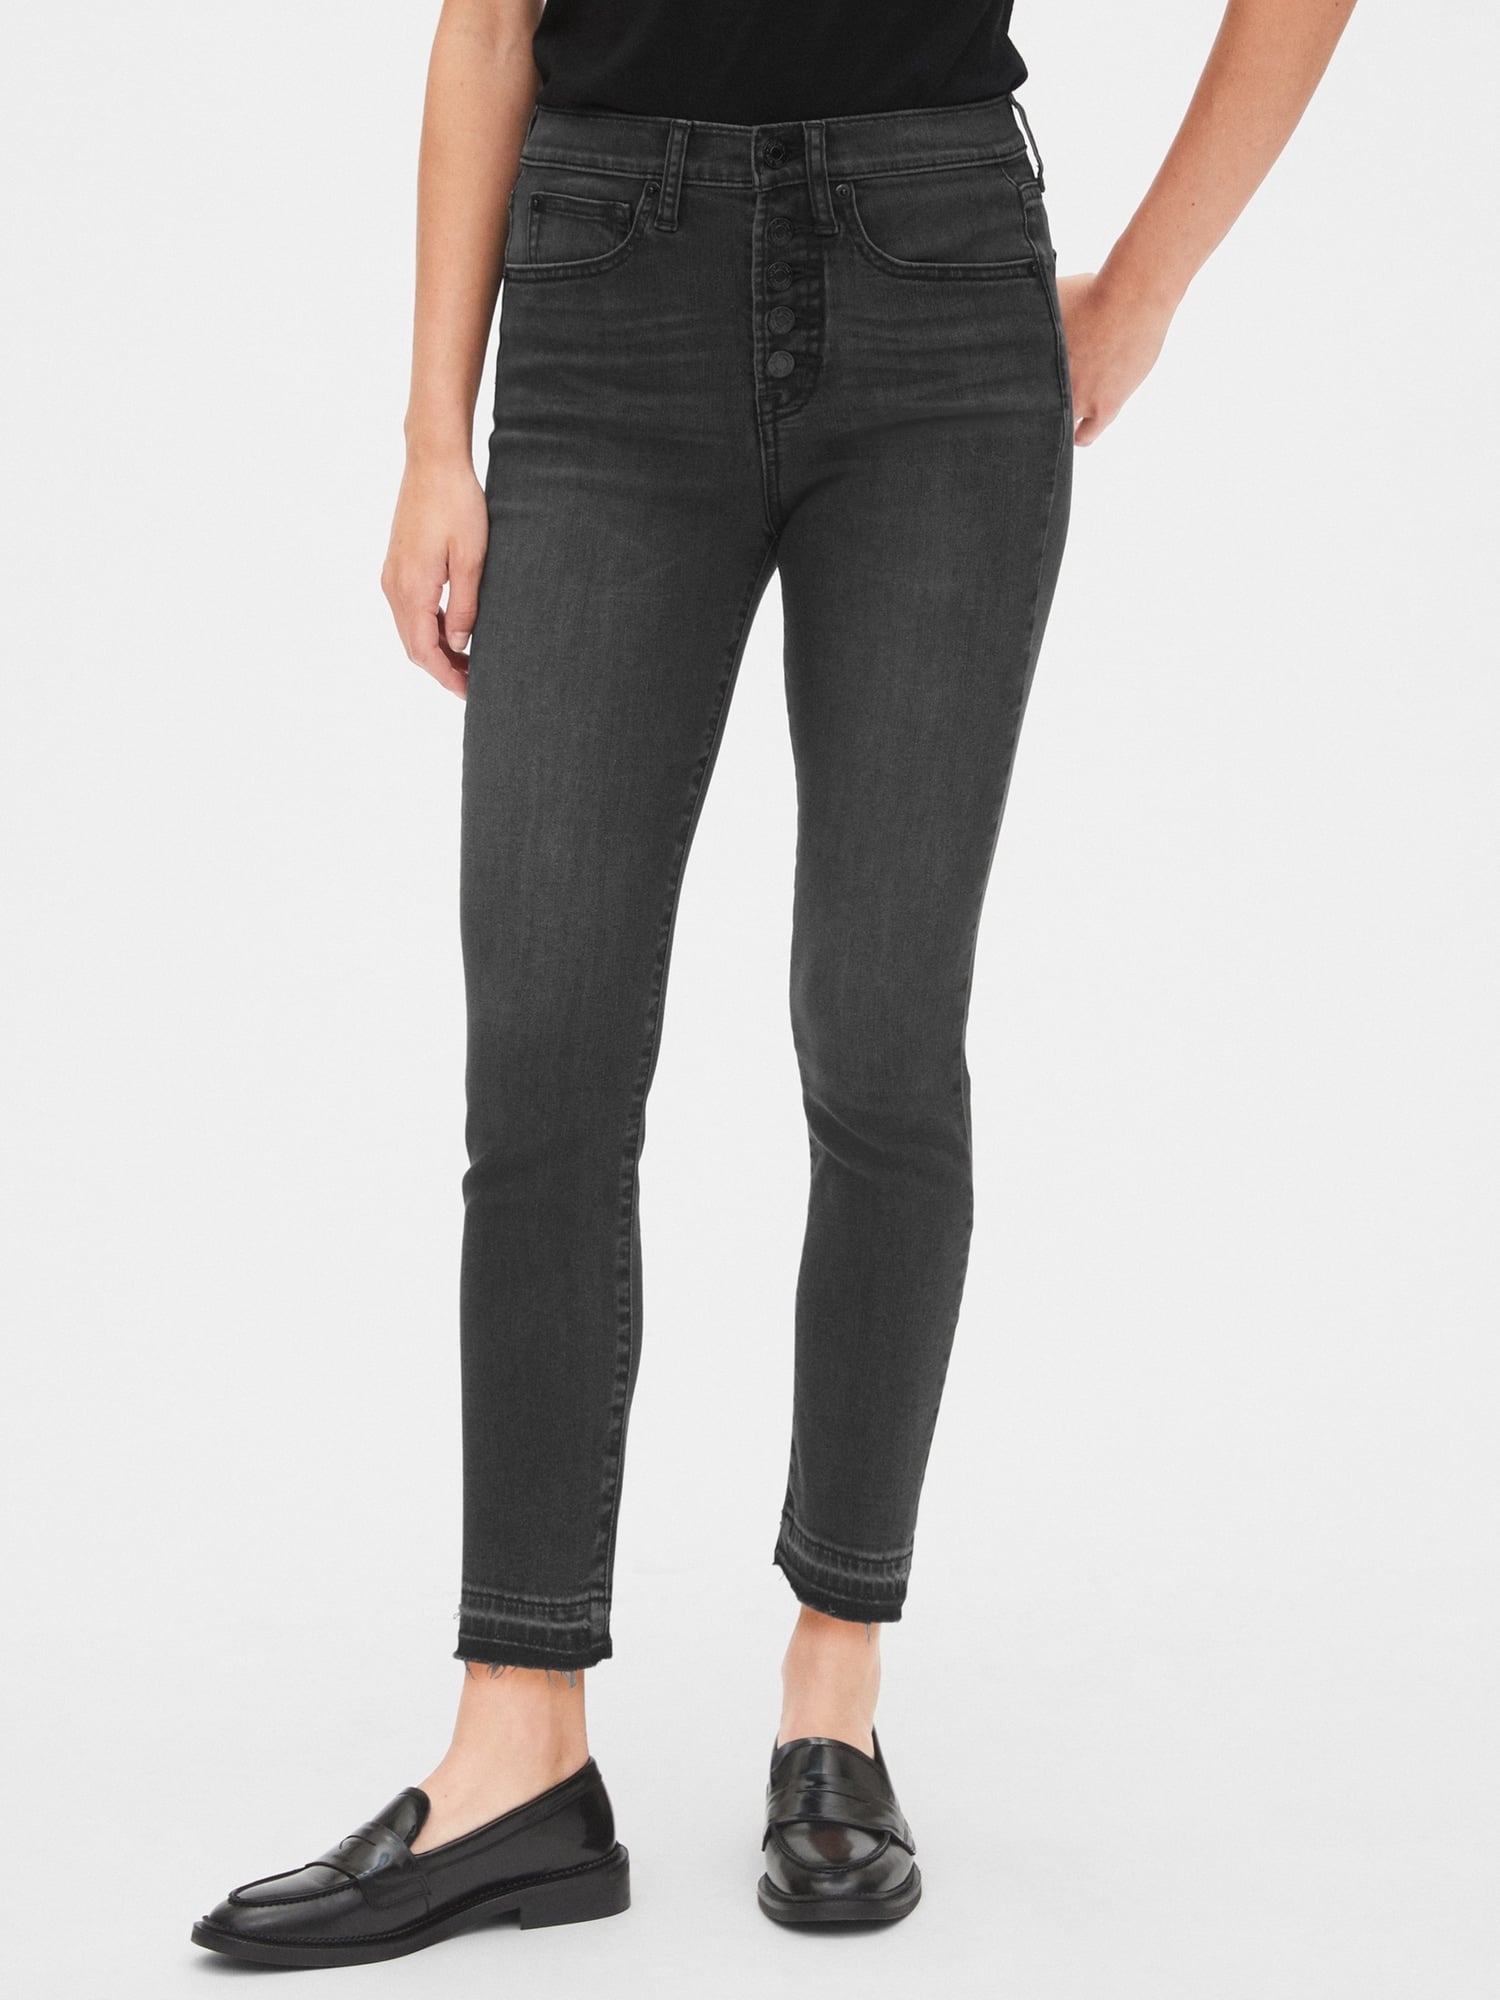 Gap High Rise True Skinny Ankle Jeans 